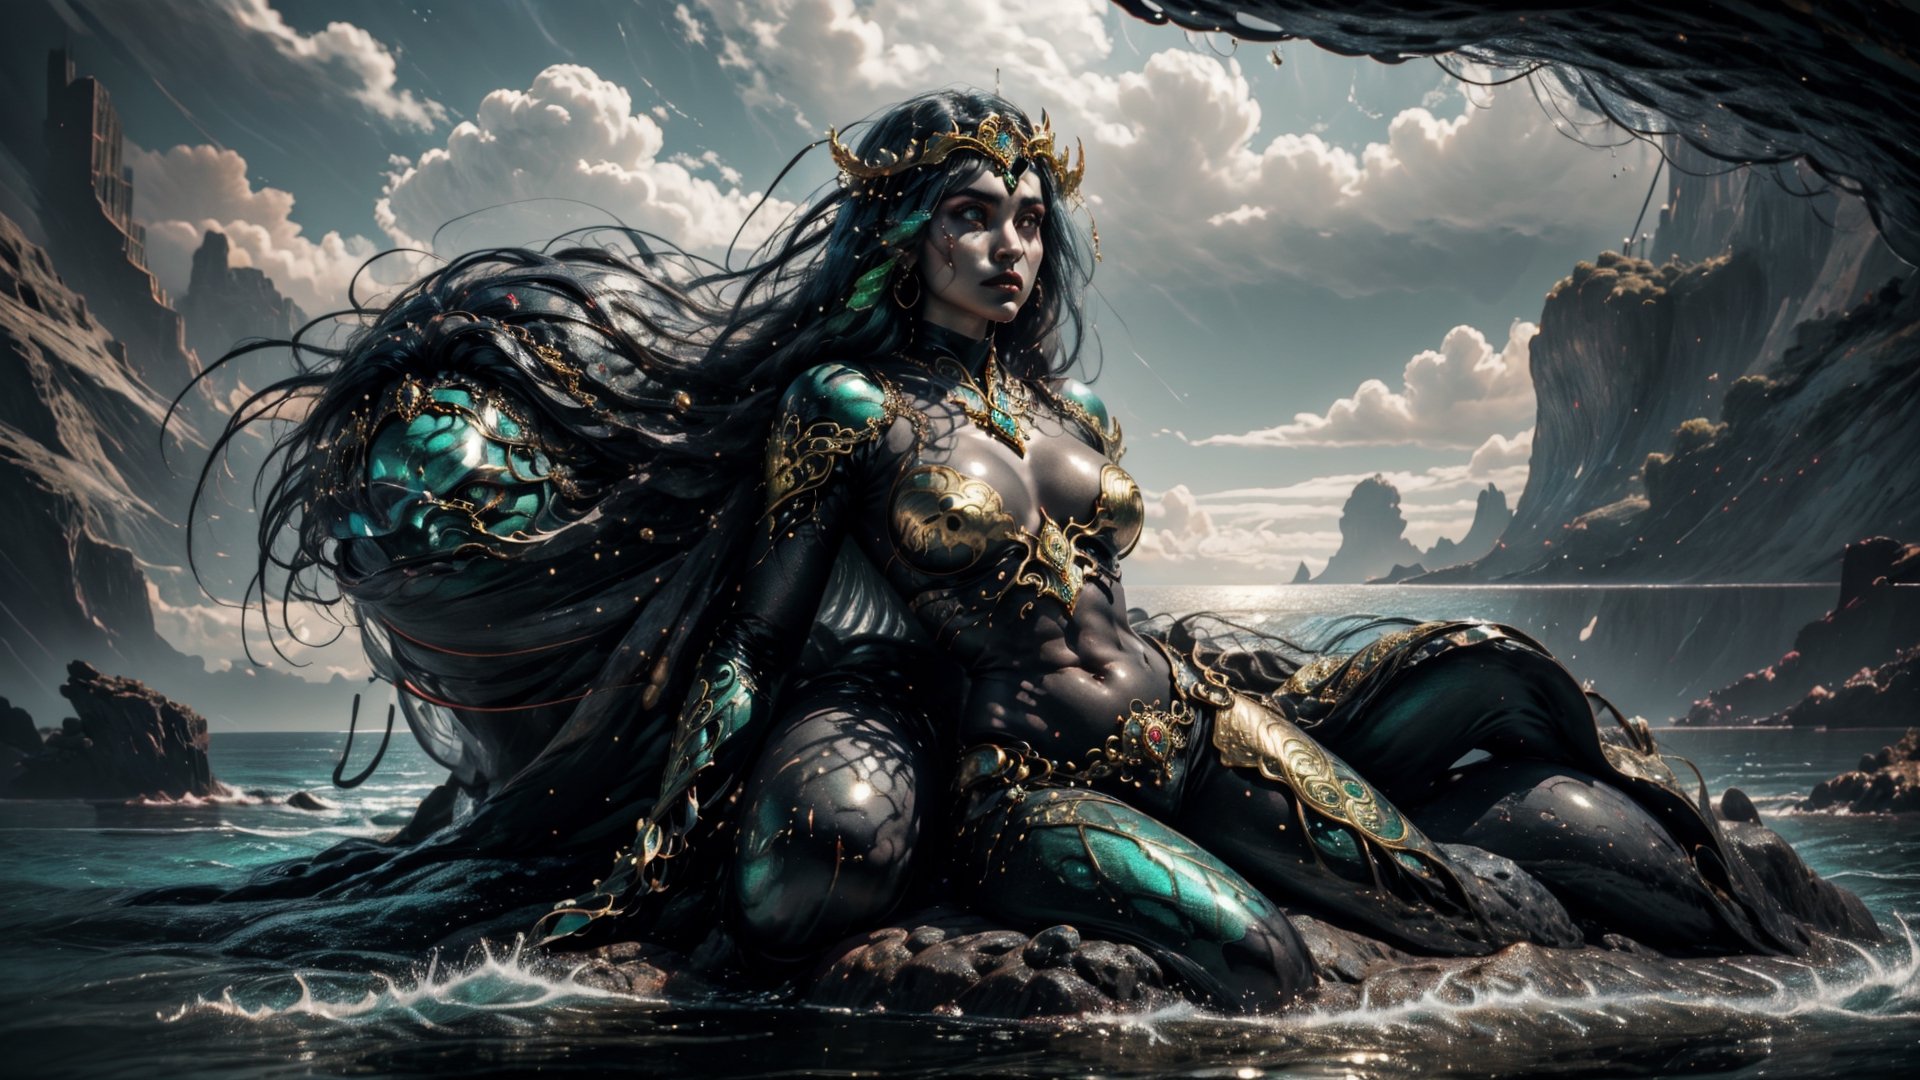 Title: Enigmatic Female Sea Creature.
Character Description:
-	Create a highly detailed and photorealistic full body depiction of an anthropomorphic female, blending attributes from a mythological kraken adorned in intricate tentacle-like appendages that cover her back, waist, legs, and head.
-	She has a menacing and foreboding facial expression with a smirk upon her lips, hinting at a hidden agenda or malevolence.
-	Her eyes are green (green_eyes, perfecteyes) that radiate a presence of evil in them.
-	Slightly furrow her eyebrows to intensify a menacing shape.
-	Her face should be adorned with an intricately designed full head piece made of sharp protruding bone and coral.
-	Hair should be, long, black (black_hair) and affected by the breeze.
-	Her arms are slightly extended away from the body, emphasizing dominance and control of her surroundings.
-	She should be represented in a full body frontal view.
-	In each hand she holds a long sword.
-	Surround her with an expansive and serene ocean, depicting the ocean's surface with subtle ripples and waves to convey its vastness.
-	The character should be sitting on top of a jagged rocky formation jutting out of the ocean's surface.
-	The swords in each hand and attire should appear menacing and formidable,
Adorn them with golden ornate embroidered metal that’s enhanced using (metallic, chrome) while also incorporating intricate designs that align with her character's aesthetic, fusing deep sea and mythical themed elements.